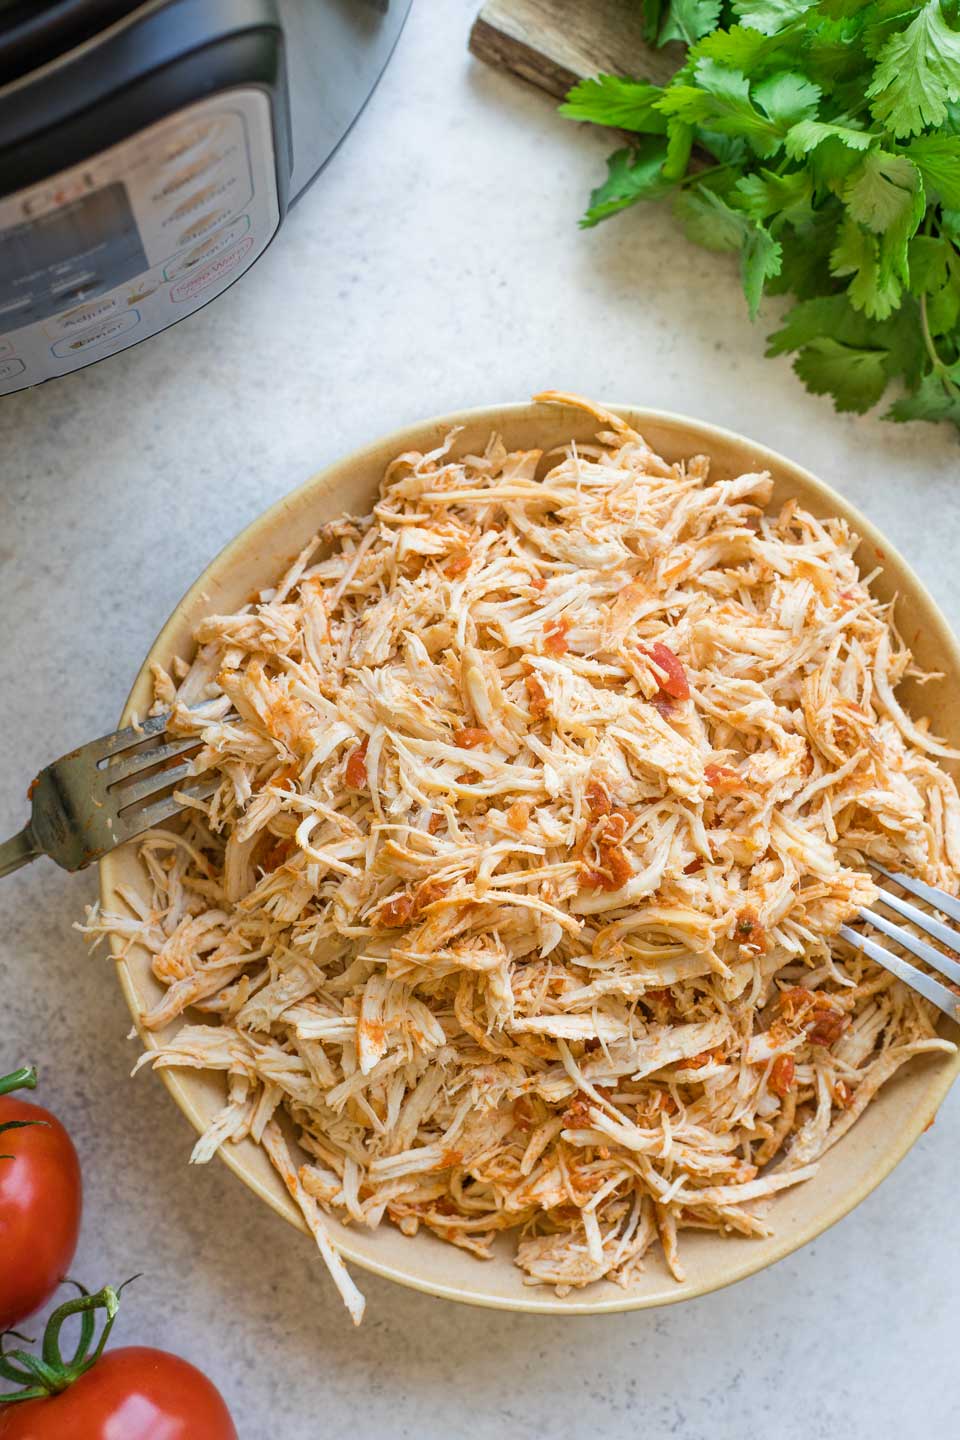 All of the shredded chicken in a pile on a plate, before most of the salsa is mixed into it.